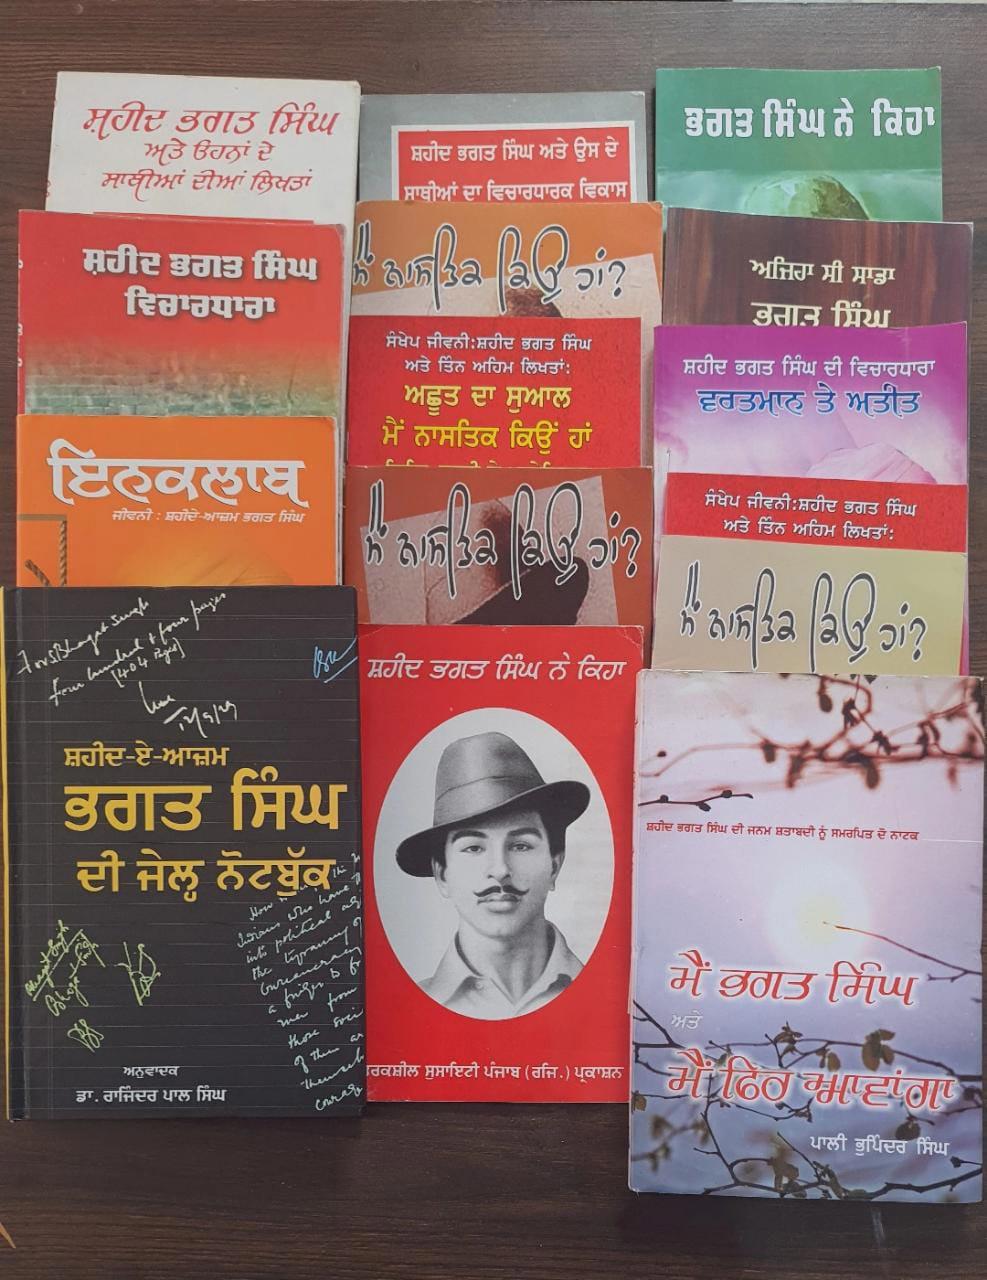 Youth distributes free books to spread Bhagat Singh's ideology